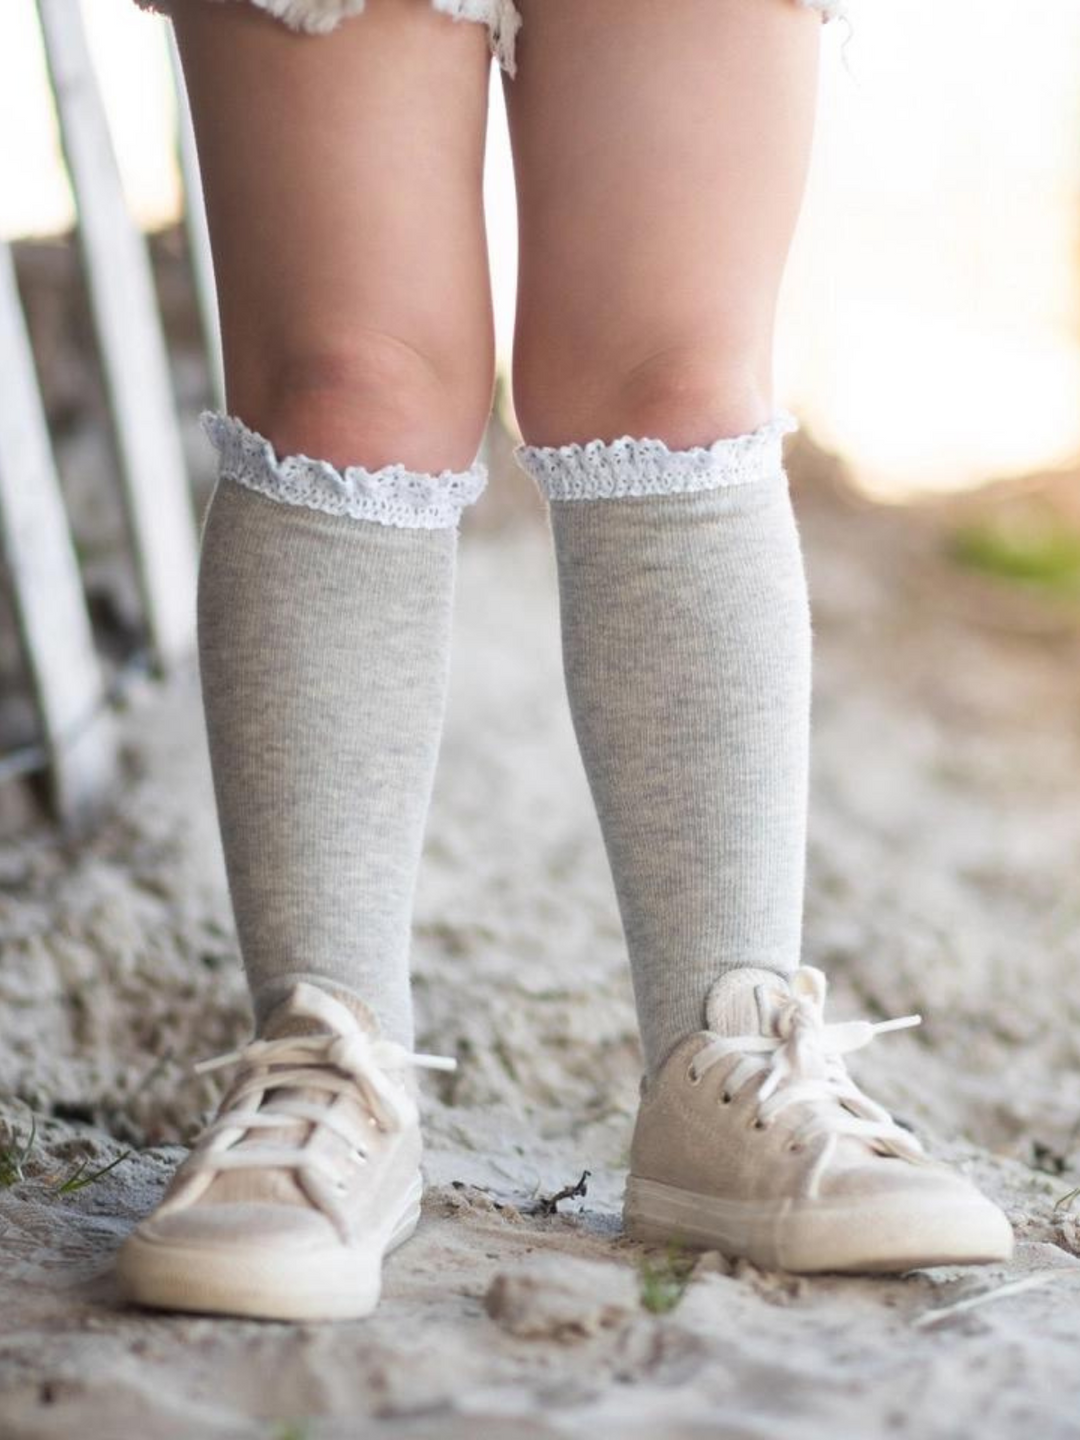 Lace Top Knee High Socks - Gray | Little Stocking Co.